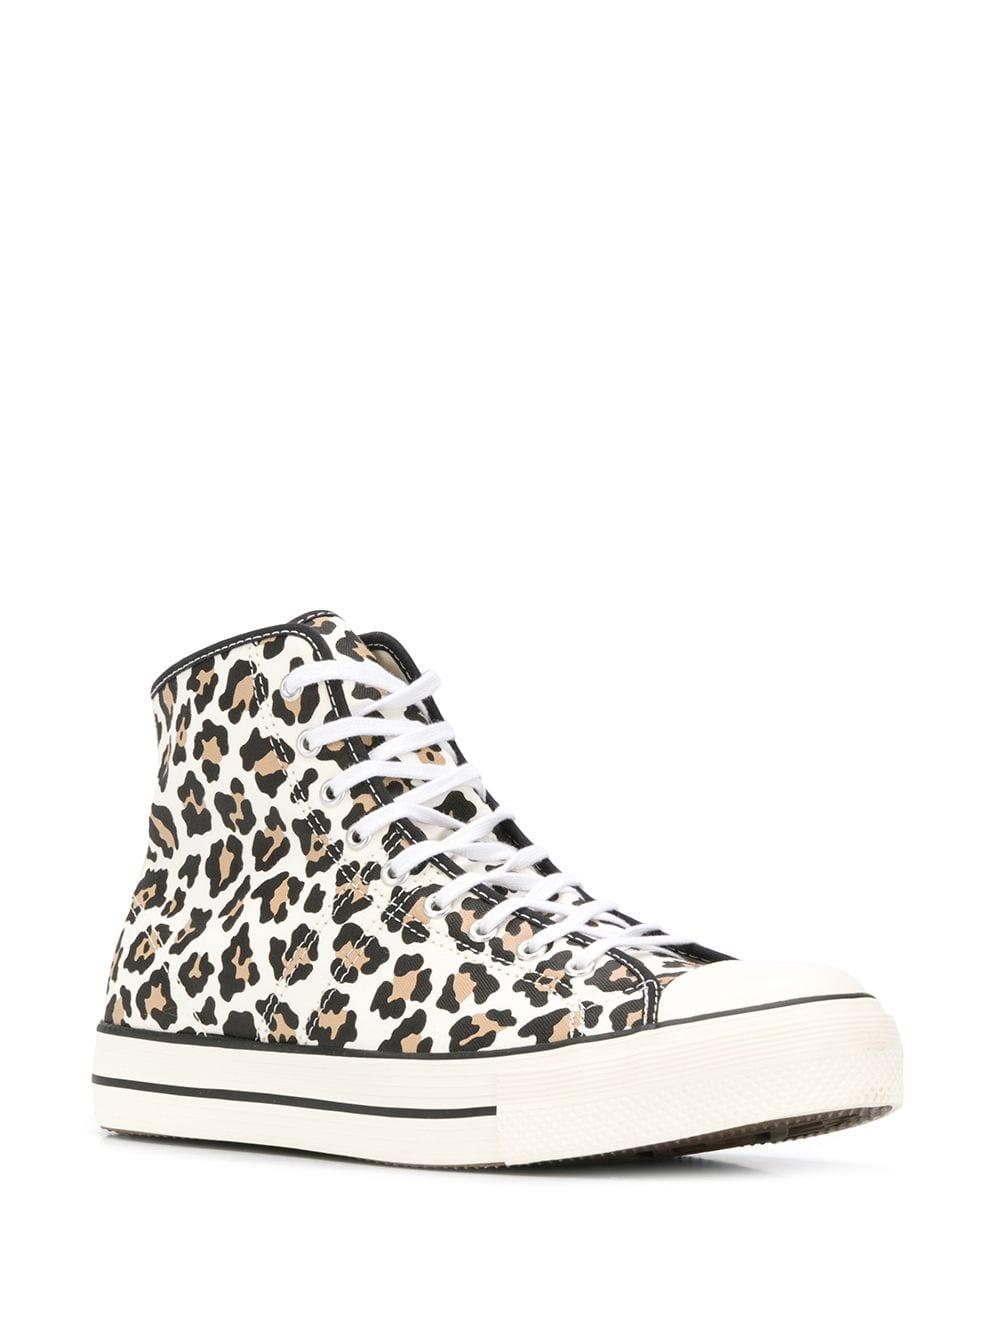 Converse Rubber Leopard Print Chuck Taylor Sneakers in White - Lyst